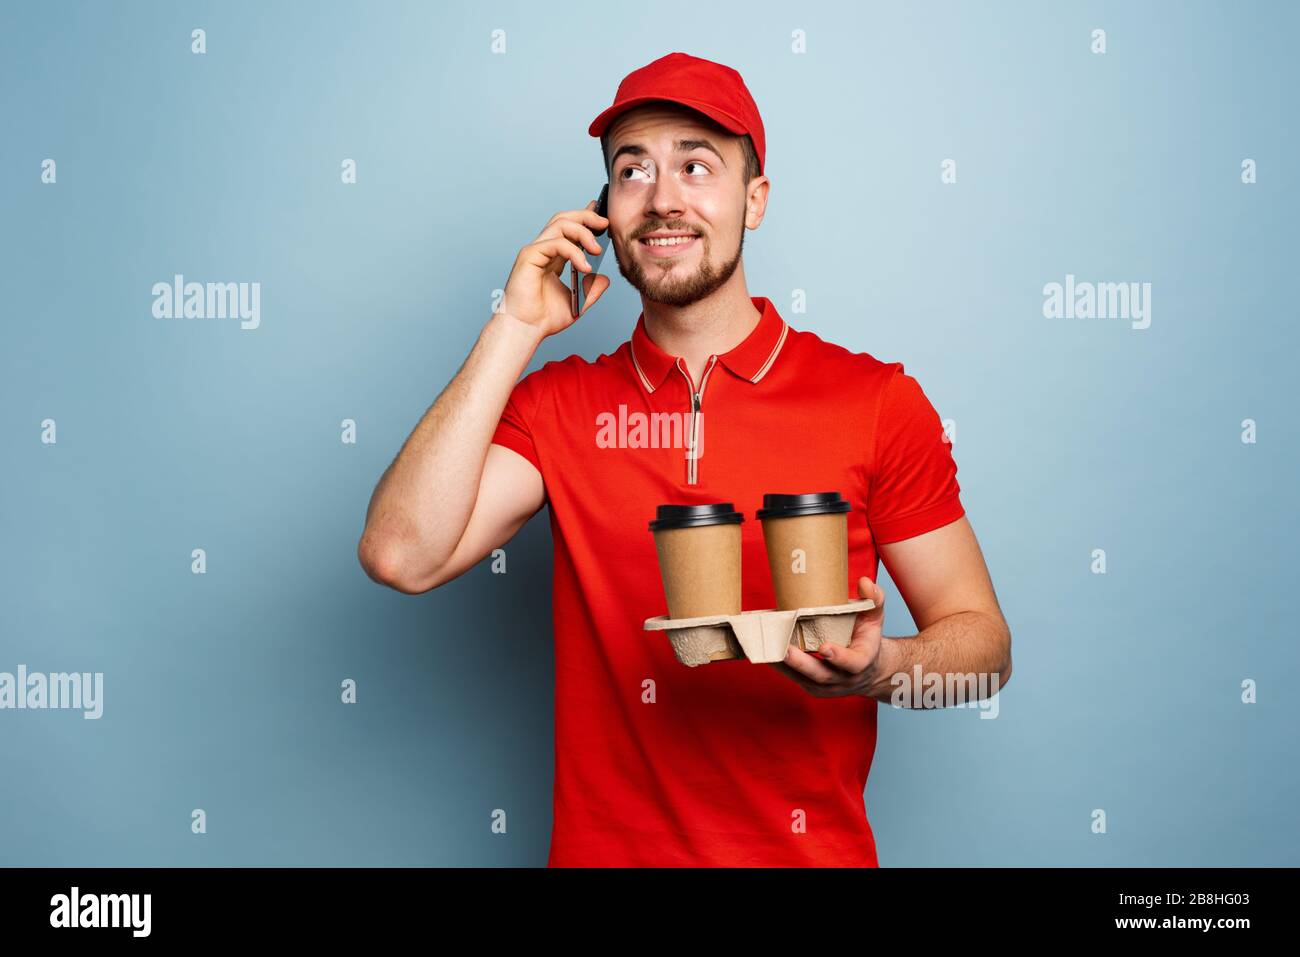 Courier delivers hot coffee and receive call on phone. Cyan background Stock Photo